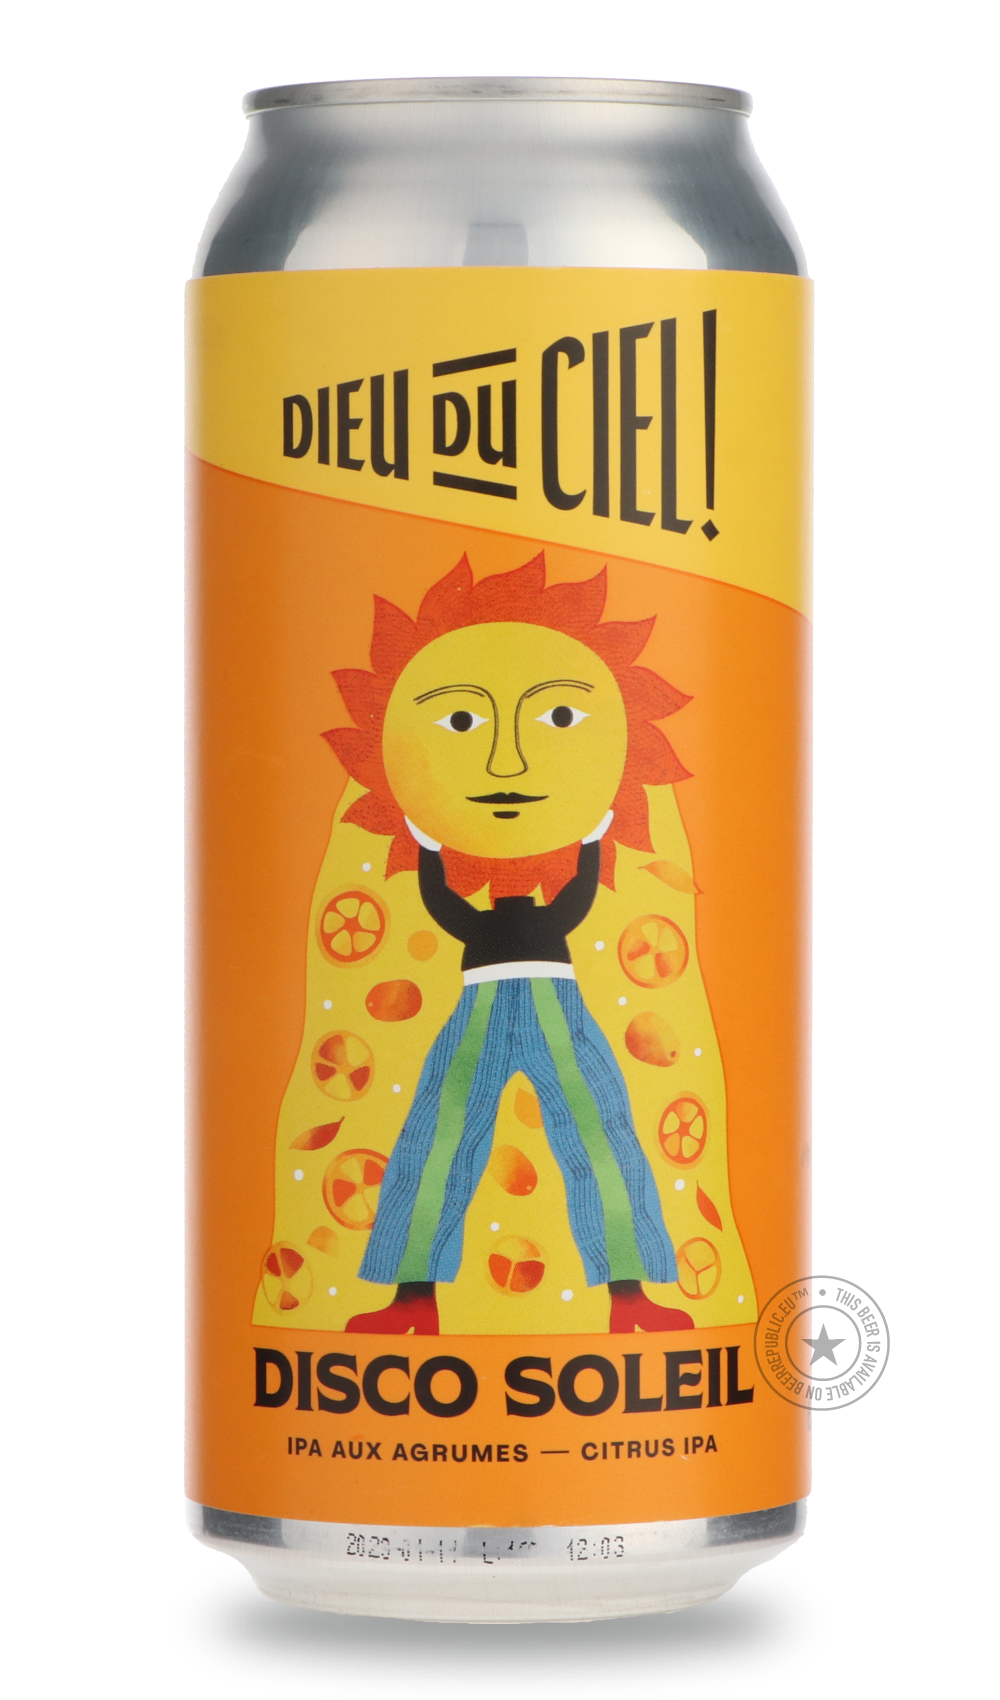 -Dieu du Ciel- Disco Soleil-IPA- Only @ Beer Republic - The best online beer store for American & Canadian craft beer - Buy beer online from the USA and Canada - Bier online kopen - Amerikaans bier kopen - Craft beer store - Craft beer kopen - Amerikanisch bier kaufen - Bier online kaufen - Acheter biere online - IPA - Stout - Porter - New England IPA - Hazy IPA - Imperial Stout - Barrel Aged - Barrel Aged Imperial Stout - Brown - Dark beer - Blond - Blonde - Pilsner - Lager - Wheat - Weizen - Amber - Barle